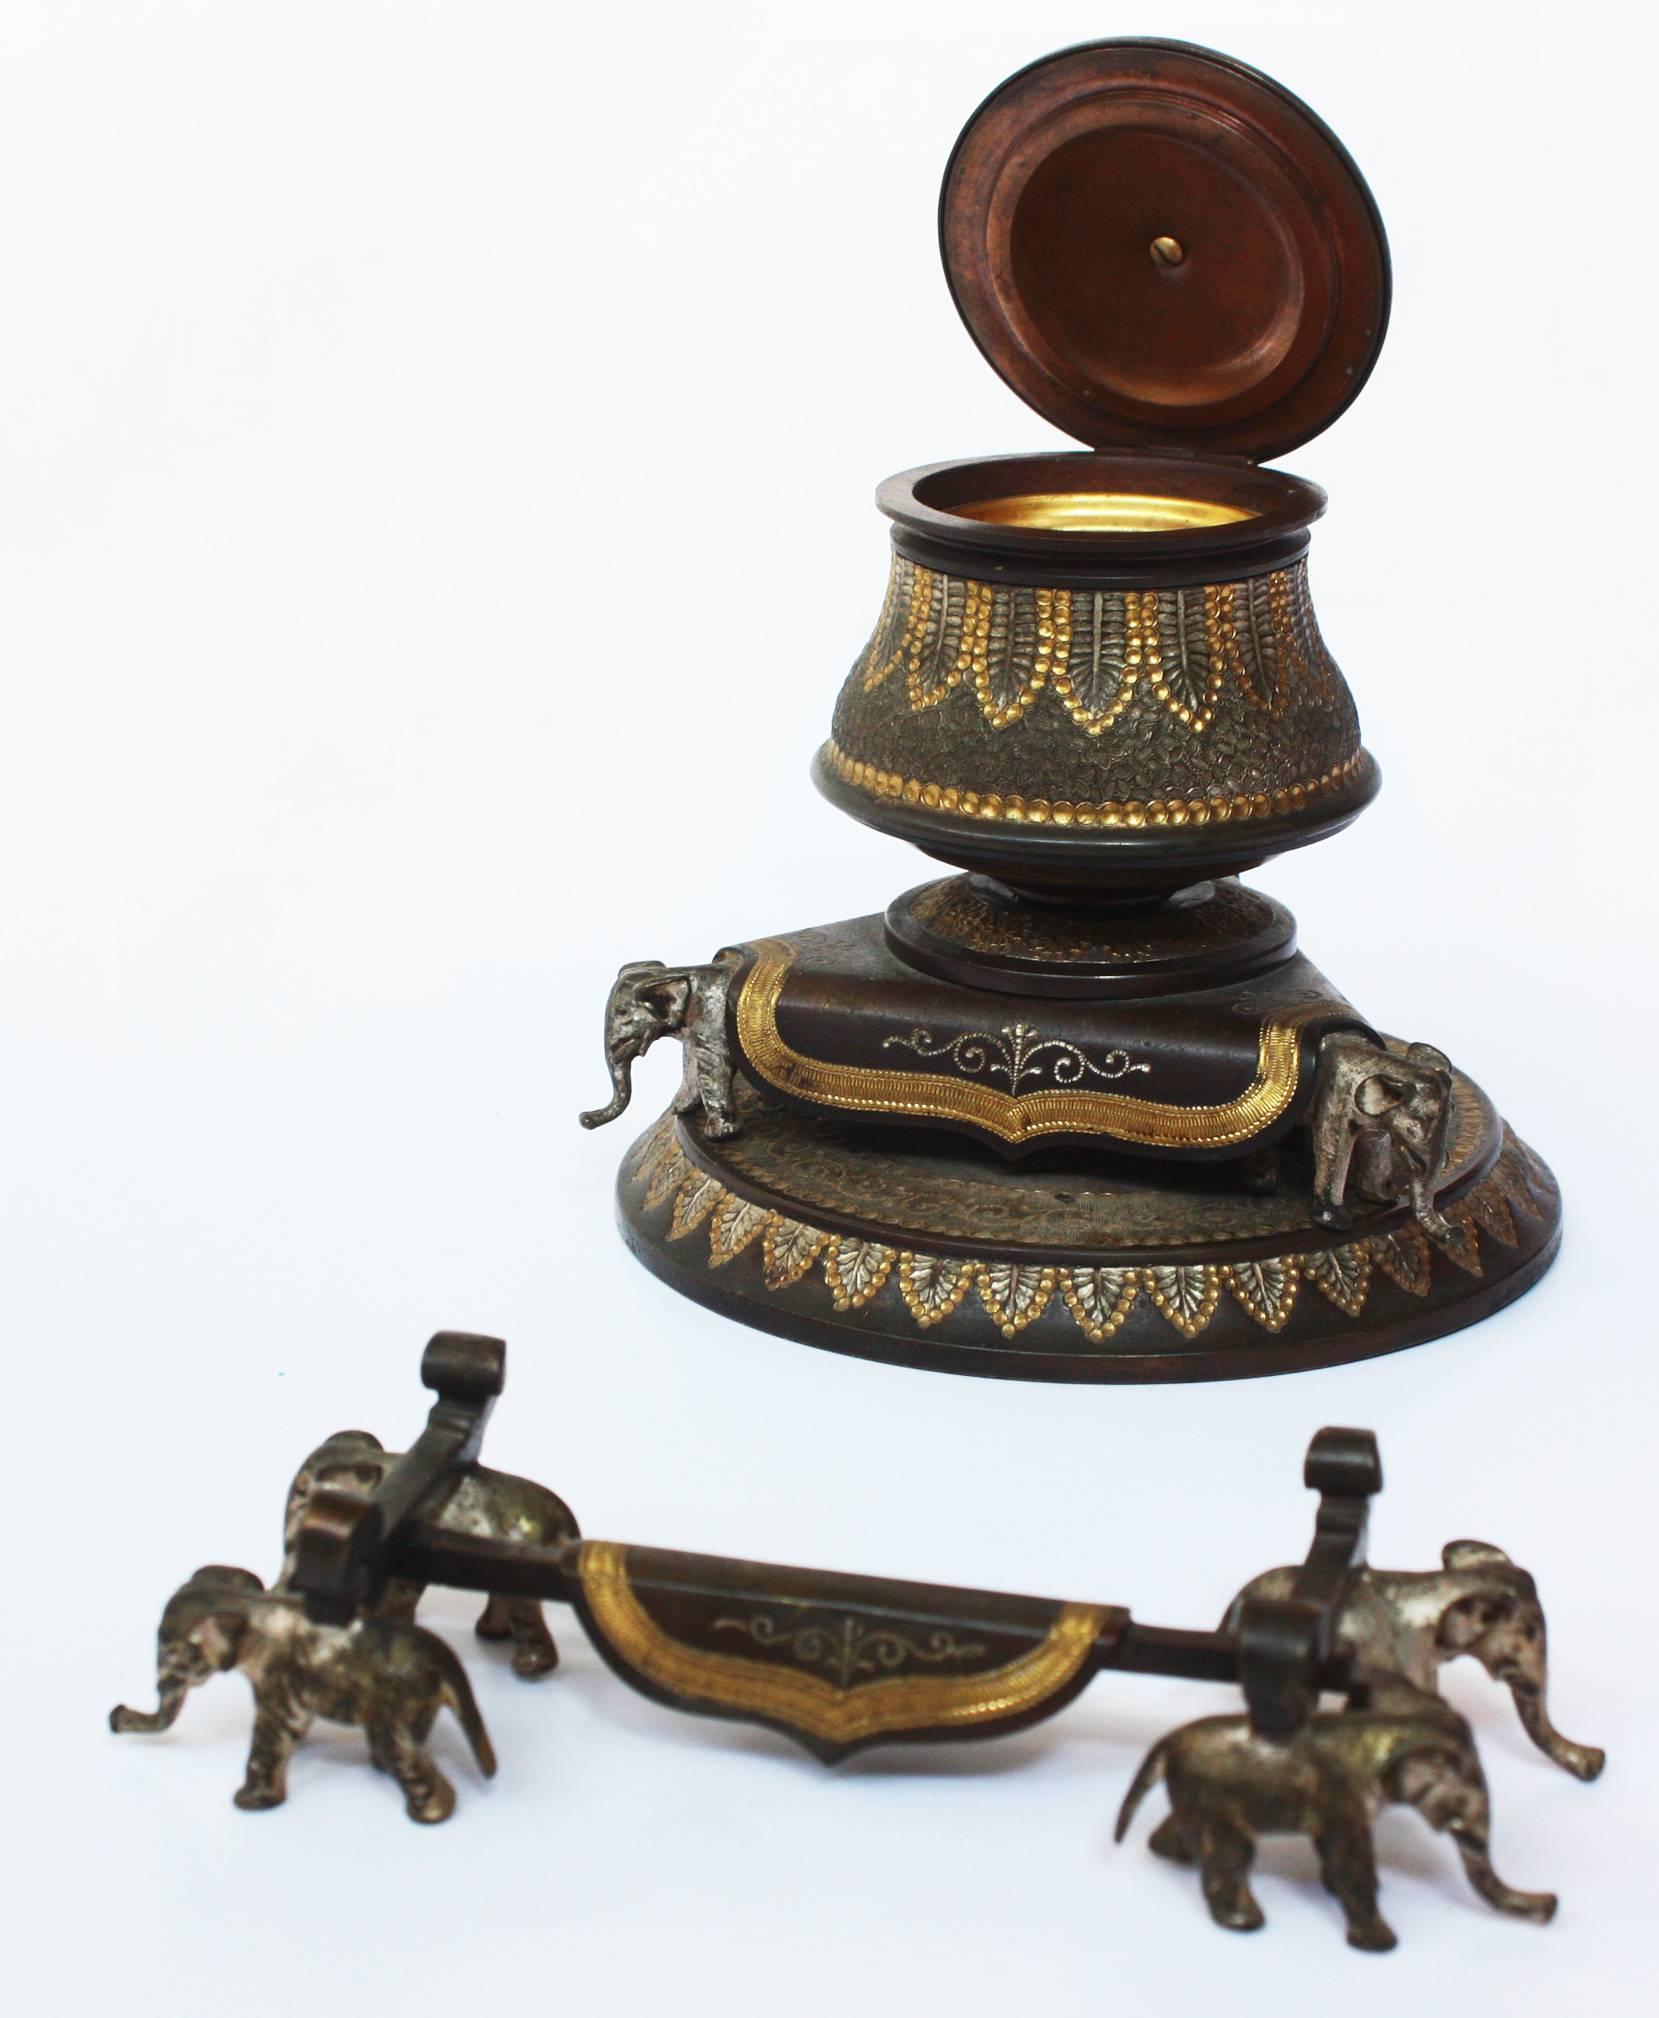 A patinated and gilt bronze inkwell, highly decorated with hammered / embossed design / pattern, three tiny elephants on a round 4.75